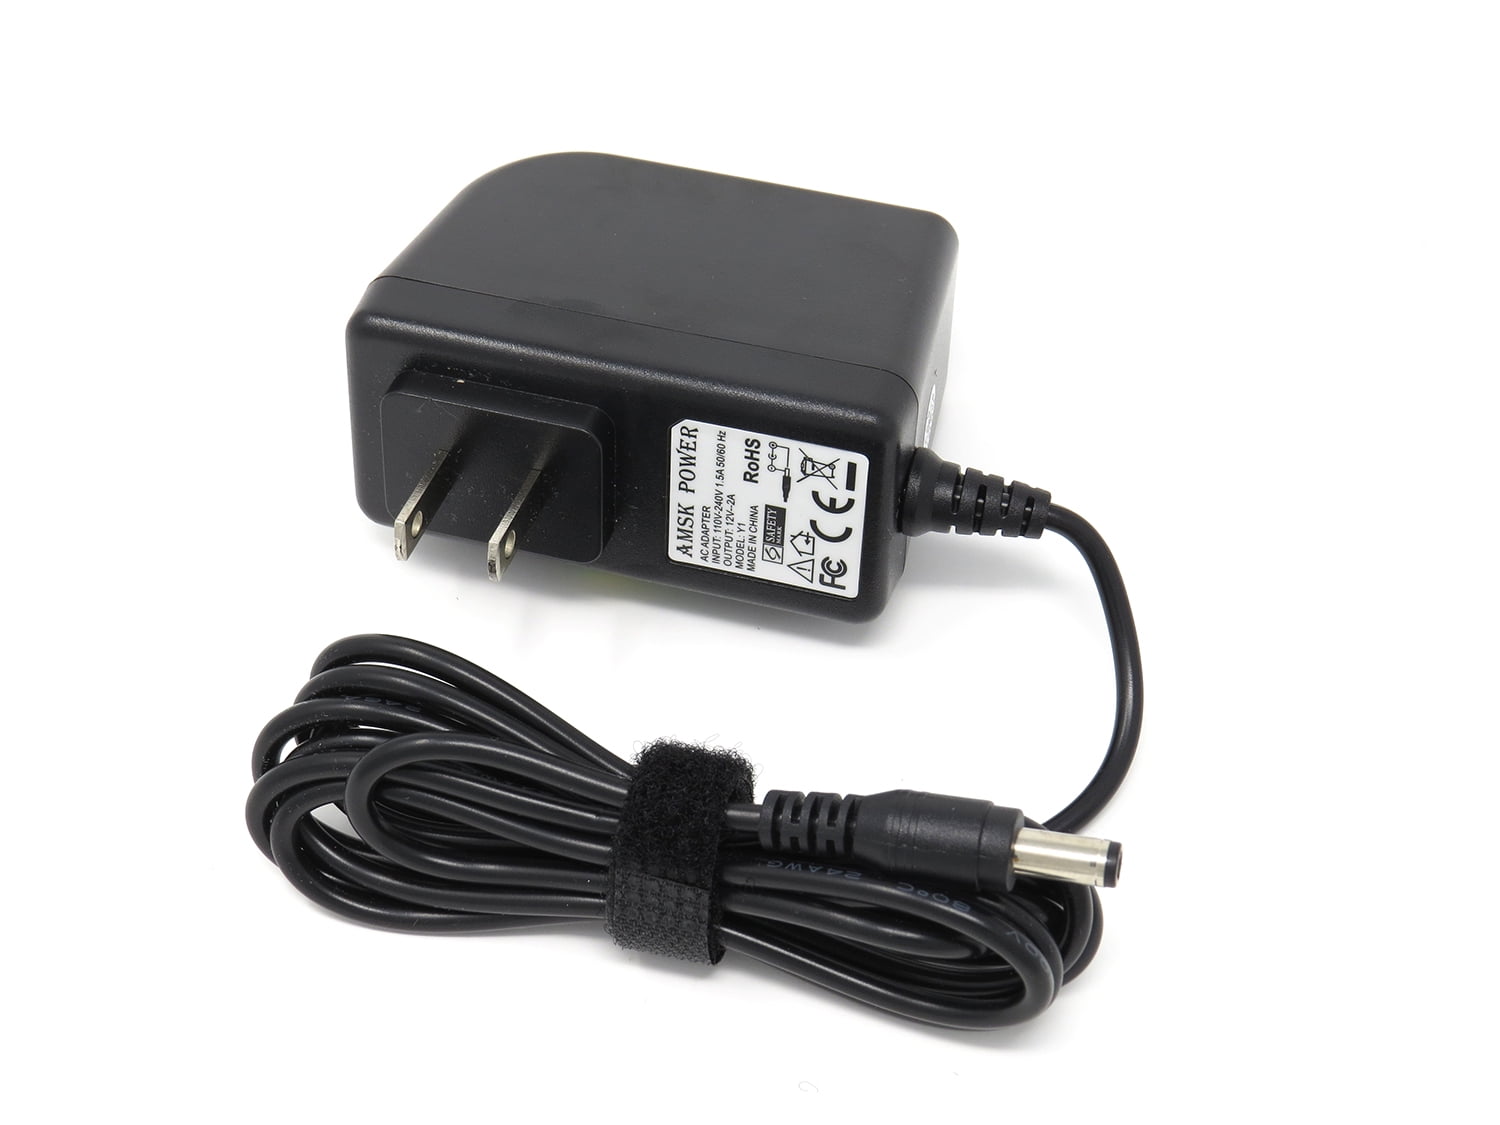 MyVolts 12V UK plug power supply compatible with Samsung D3 Station 3TB External hard drive